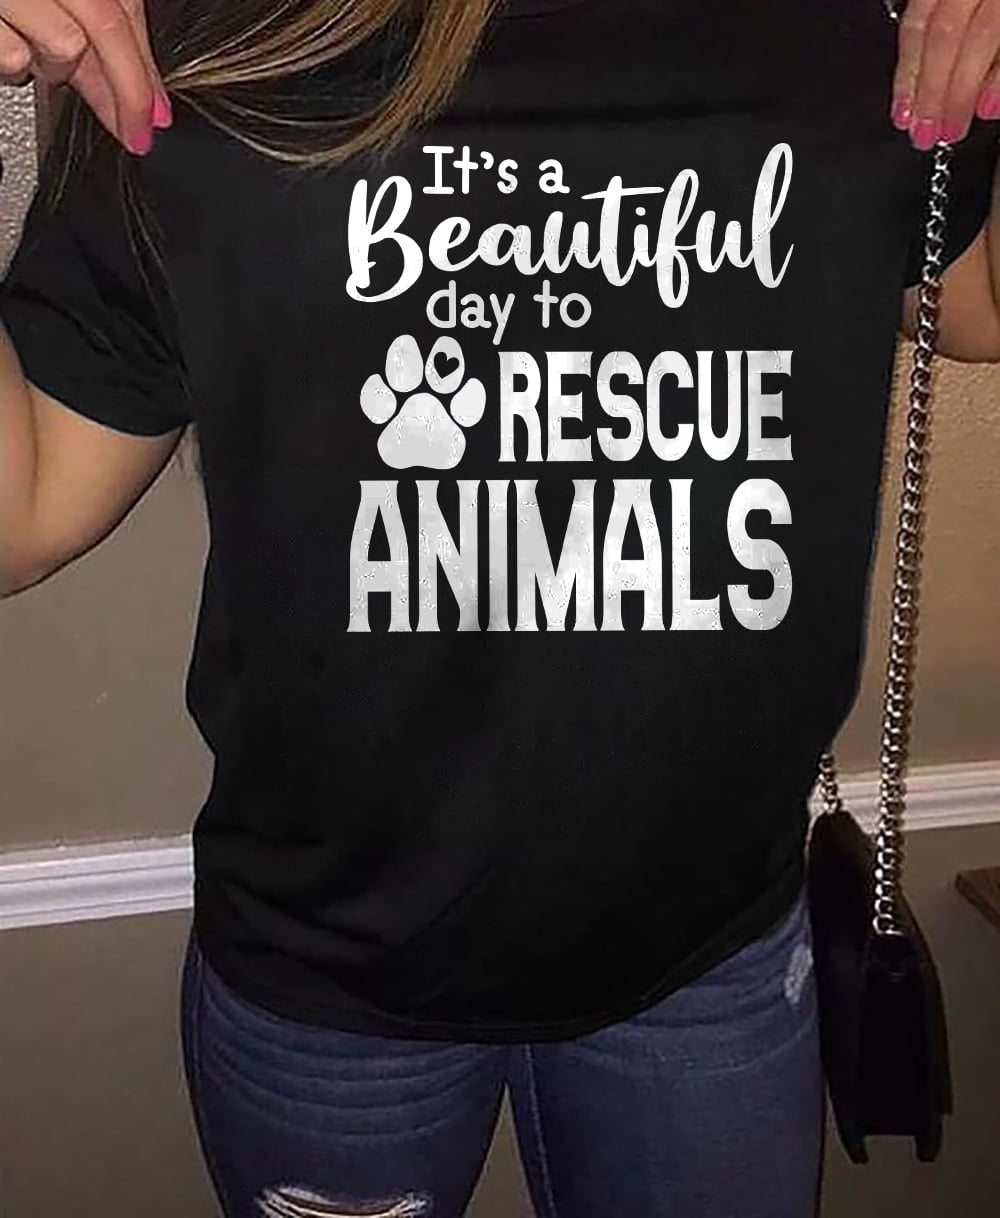 It's a beautiful day to rescue animals